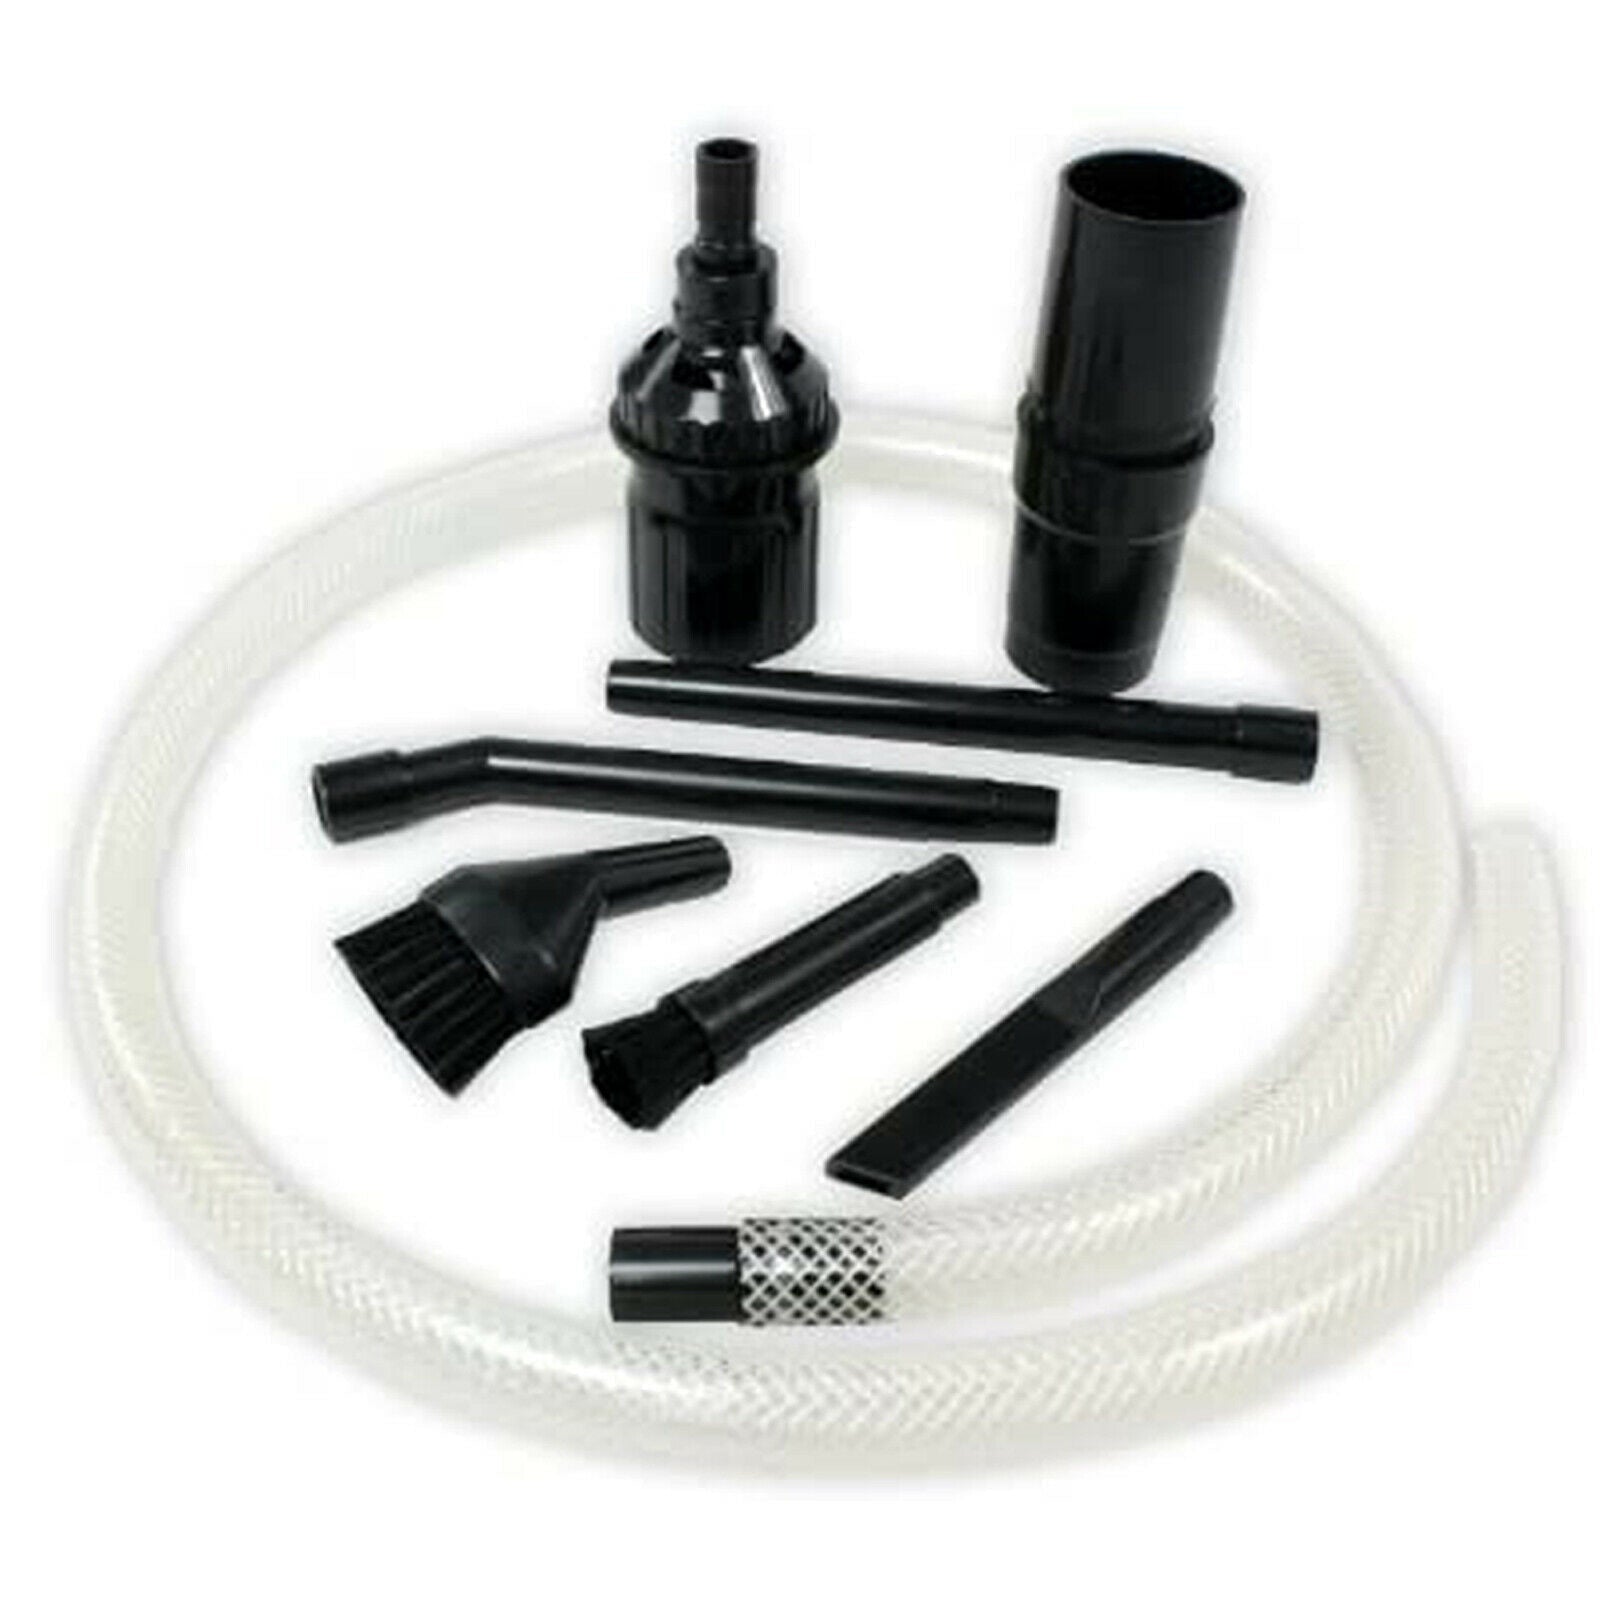 Car Detailing Complete Valet Kit with Micro Tools & Cloths for Vacuum Cleaner UNIVERSAL (32mm/35mm)